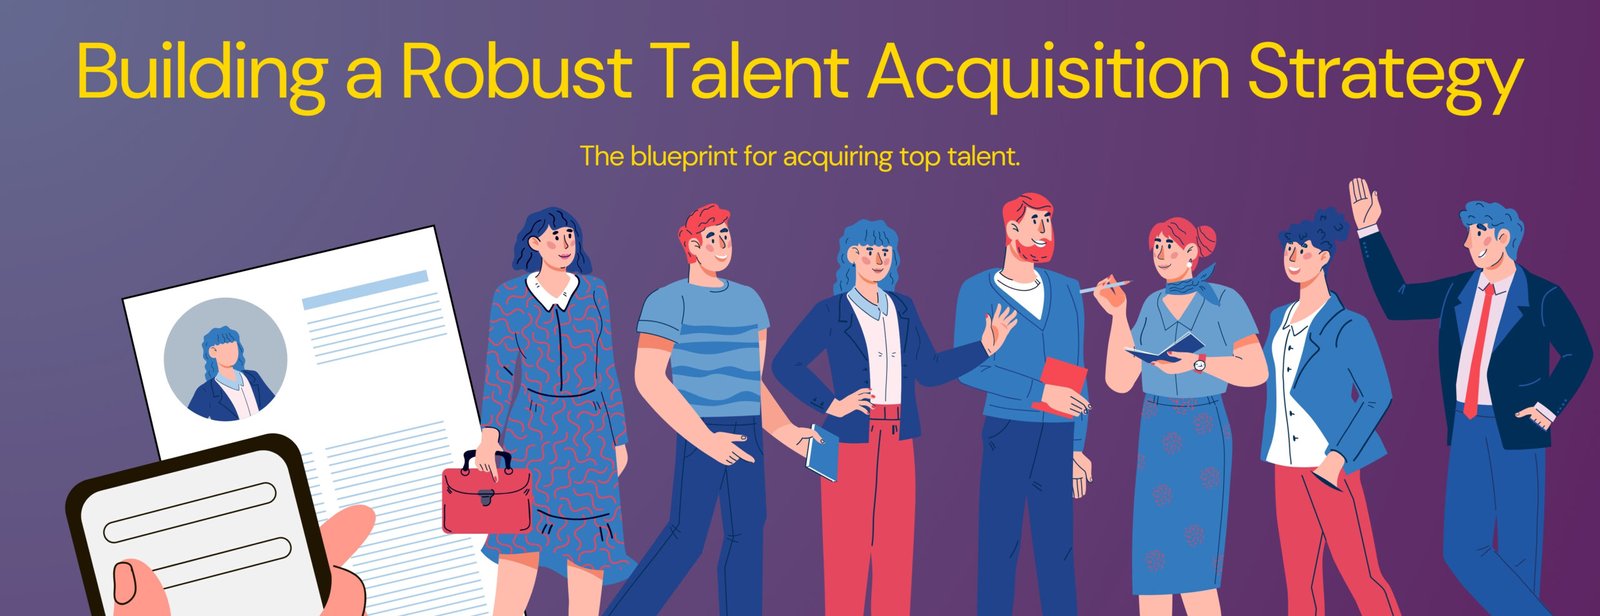 Building a Robust Talent Acquisition Strategy